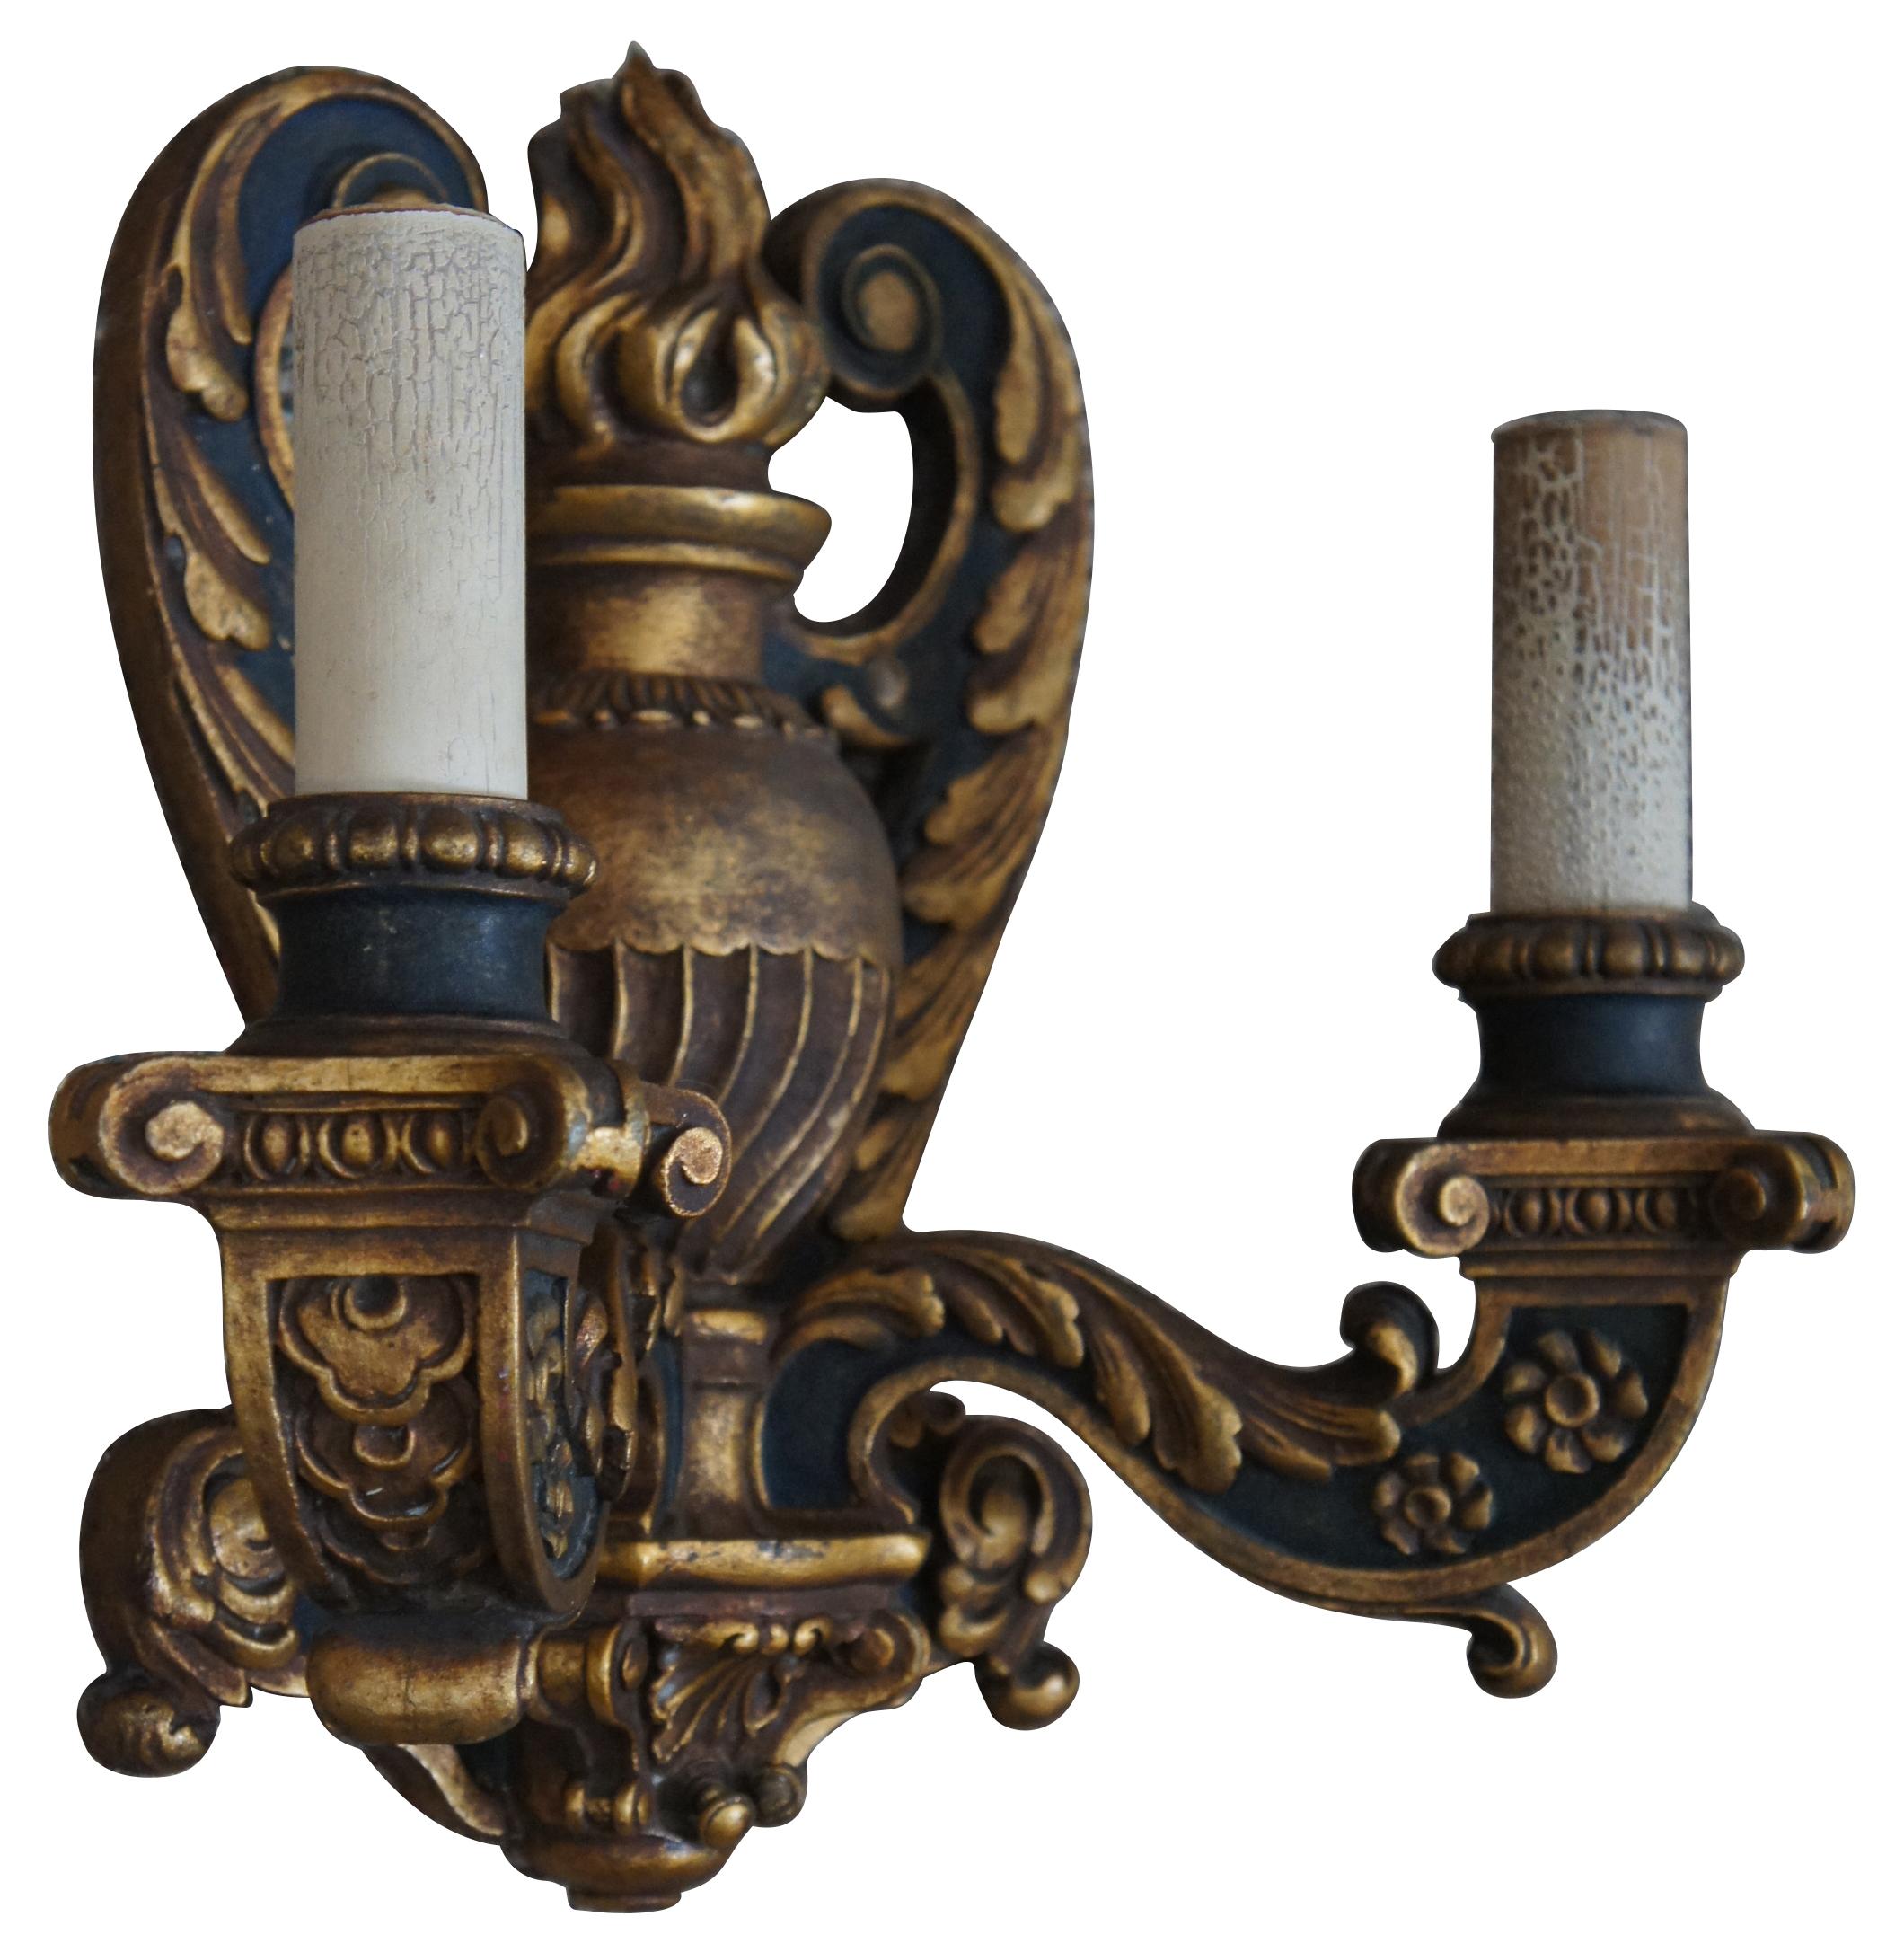 2 Antique Baroque Revival Neoclassical Carved Two Light Candelabra Wall Sconces In Good Condition For Sale In Dayton, OH